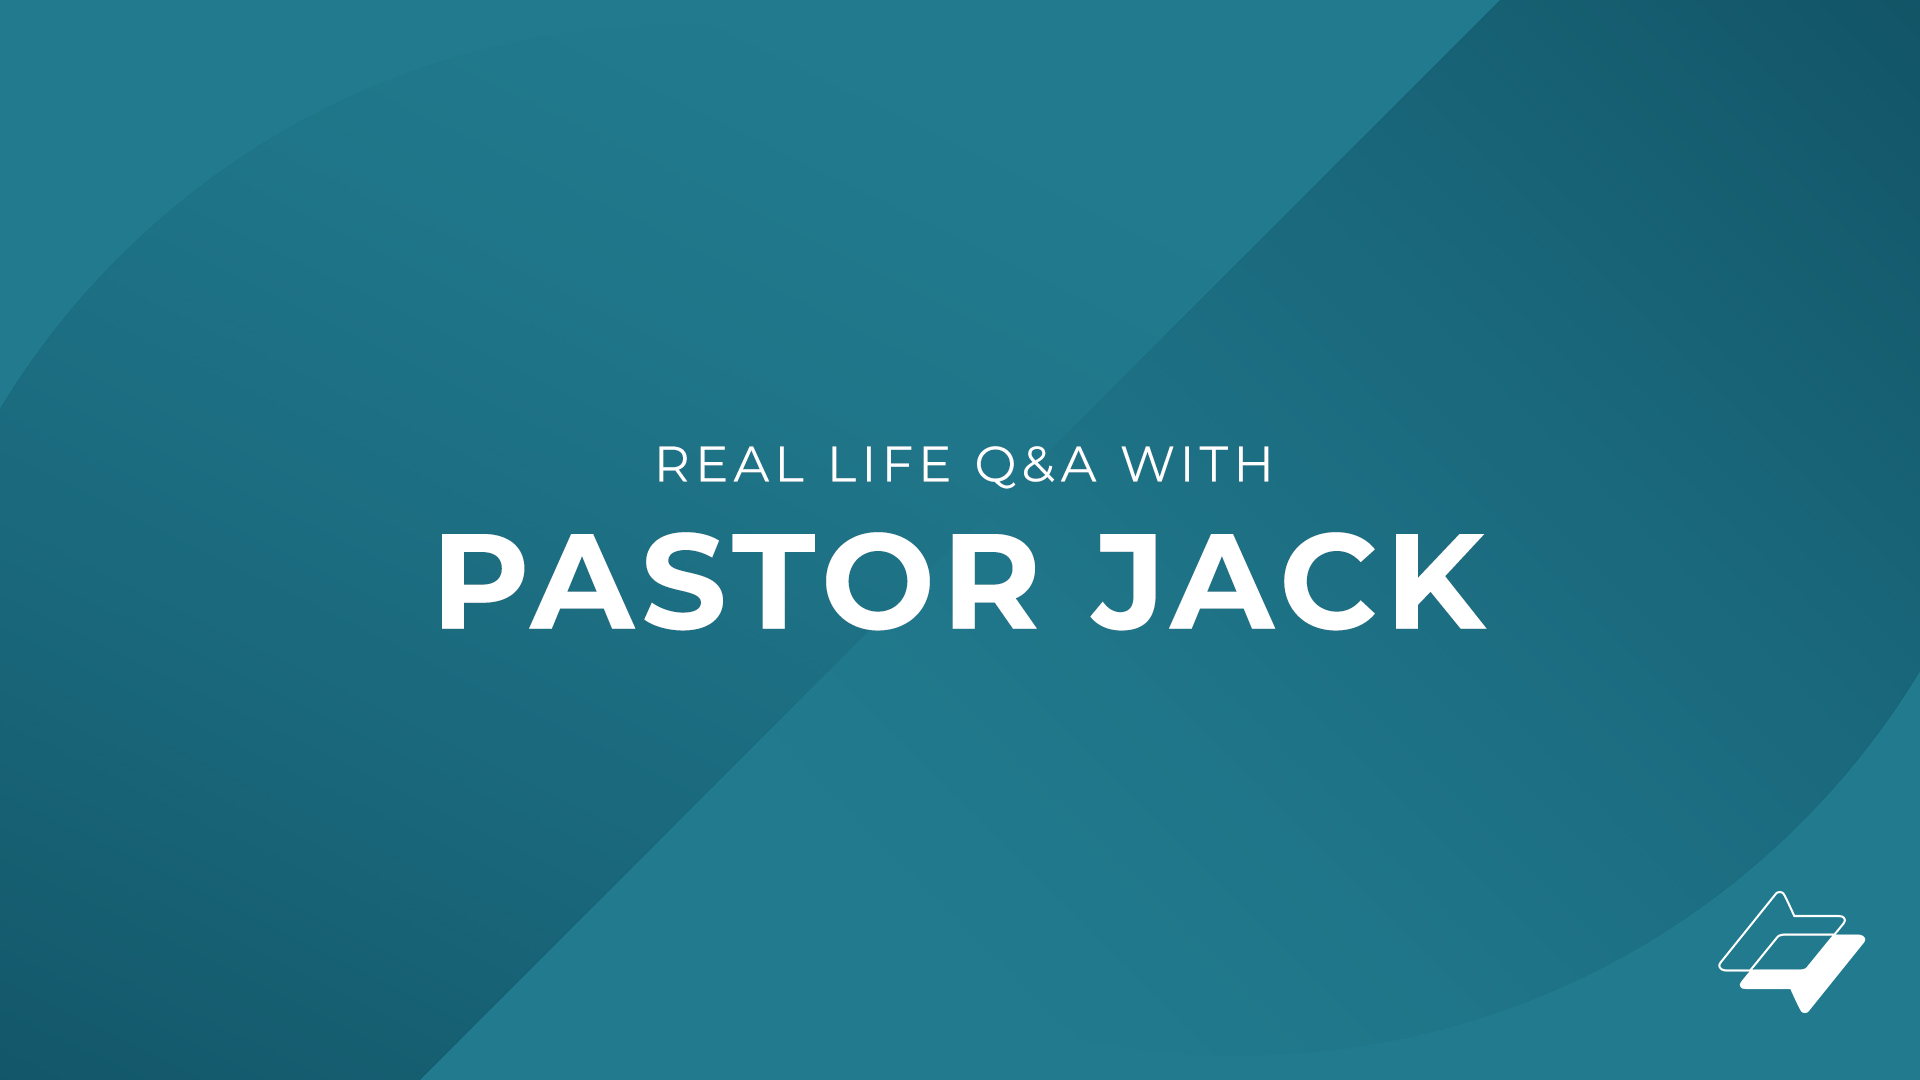 Real Life Q&A with Pastor Jack